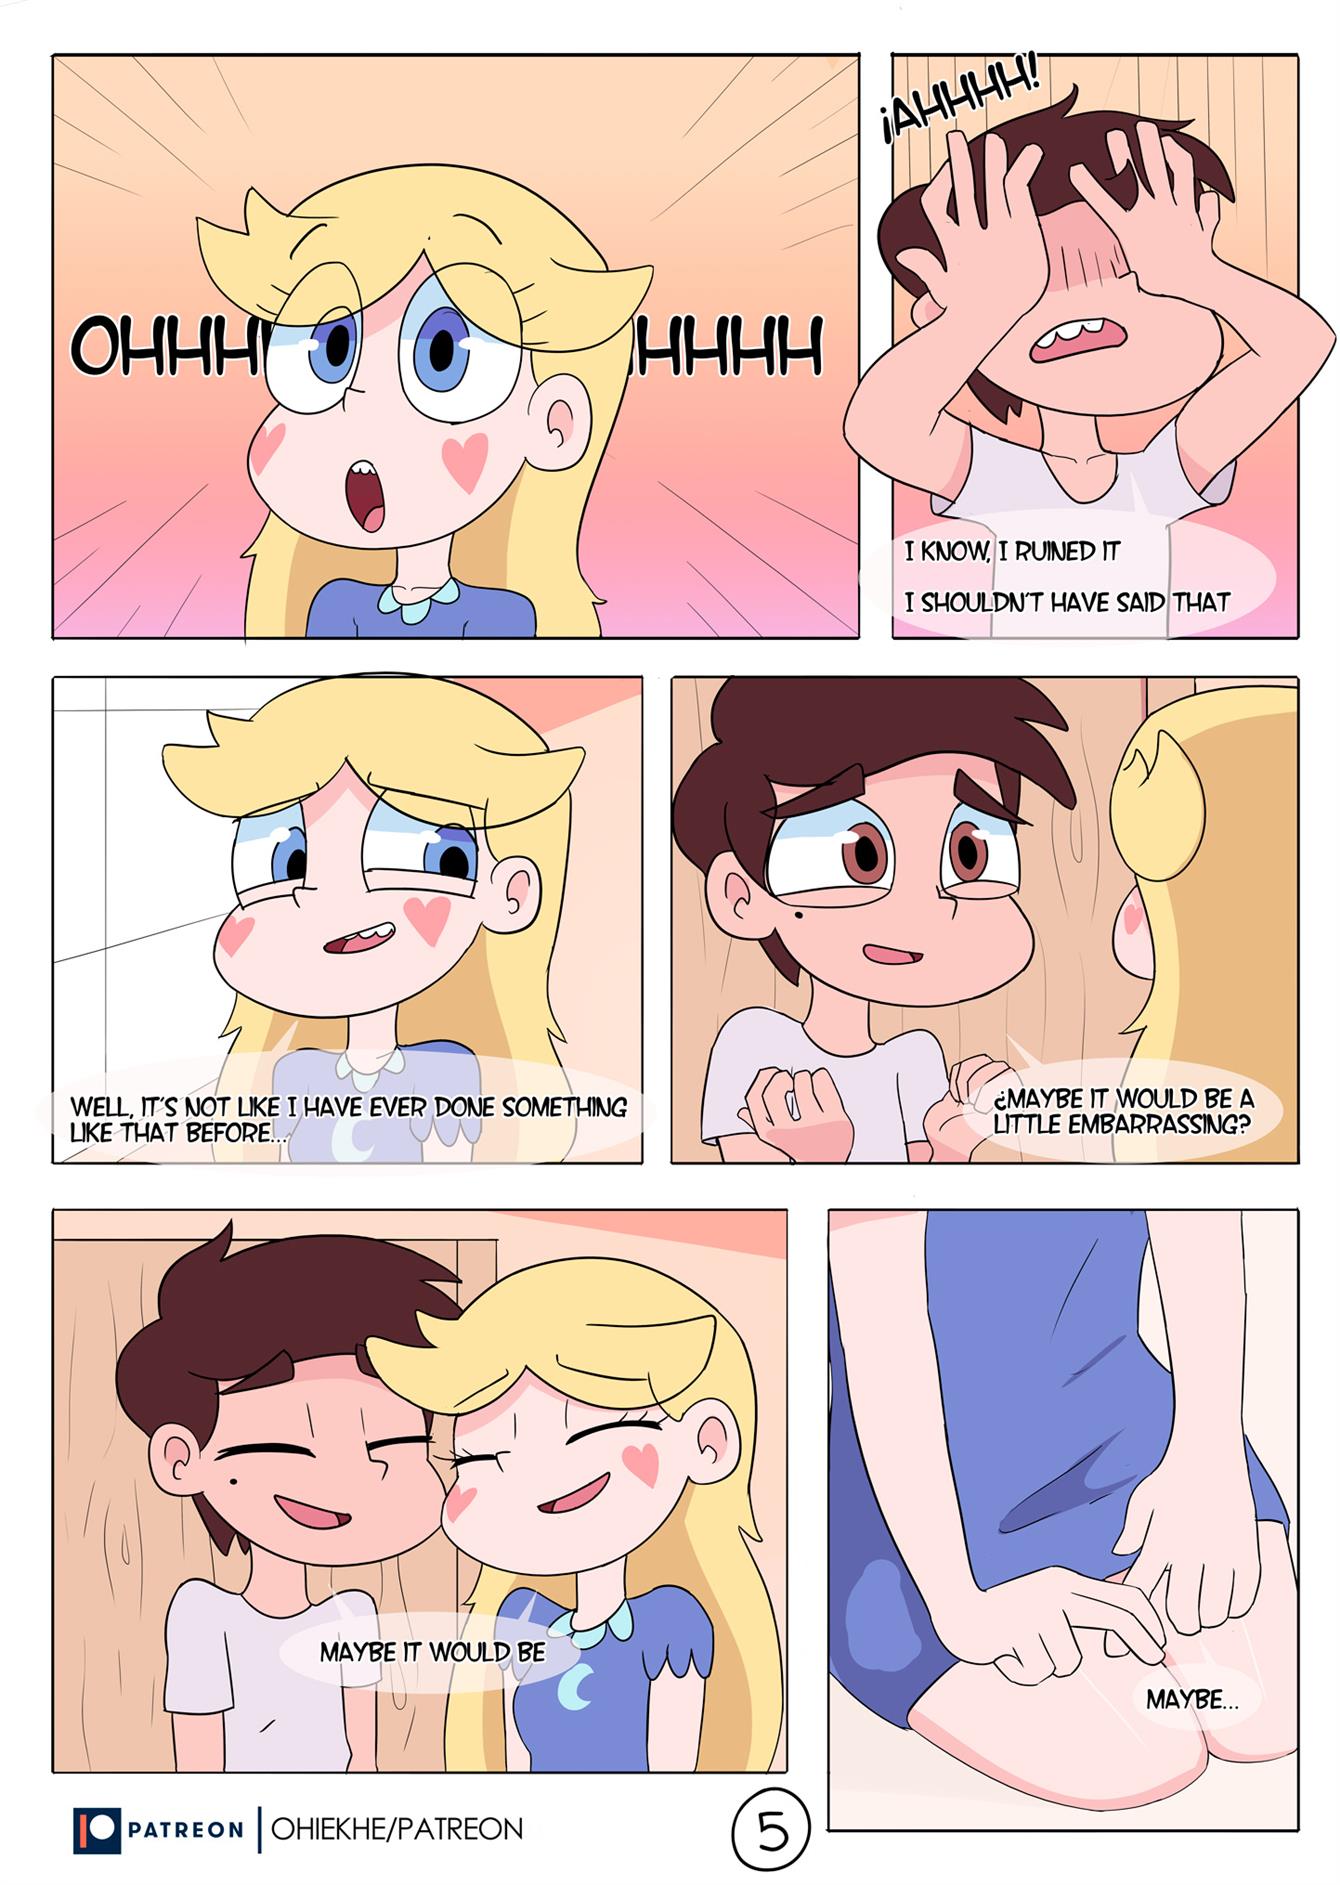 Time Alone (Star vs the Forces of Evil)